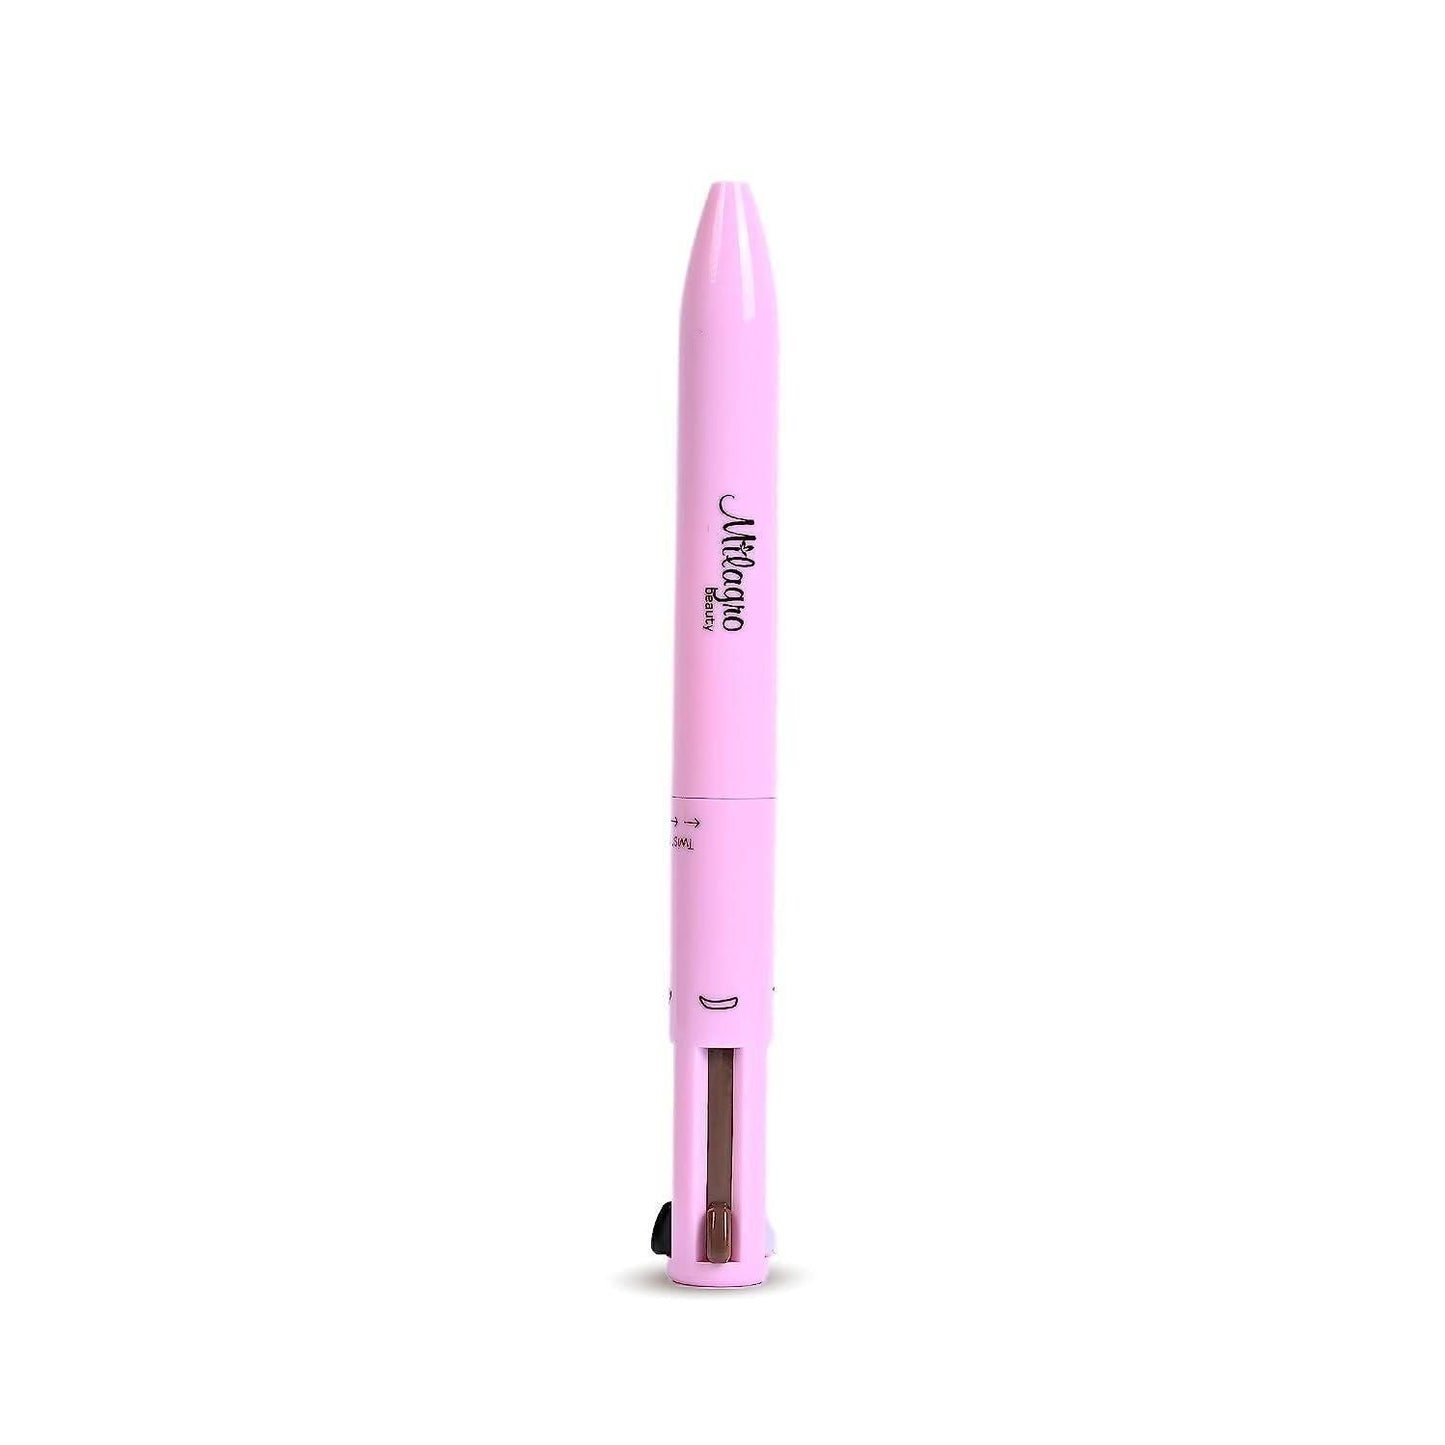 Beauty On-The-Go 4 IN 1 Makeup Pen